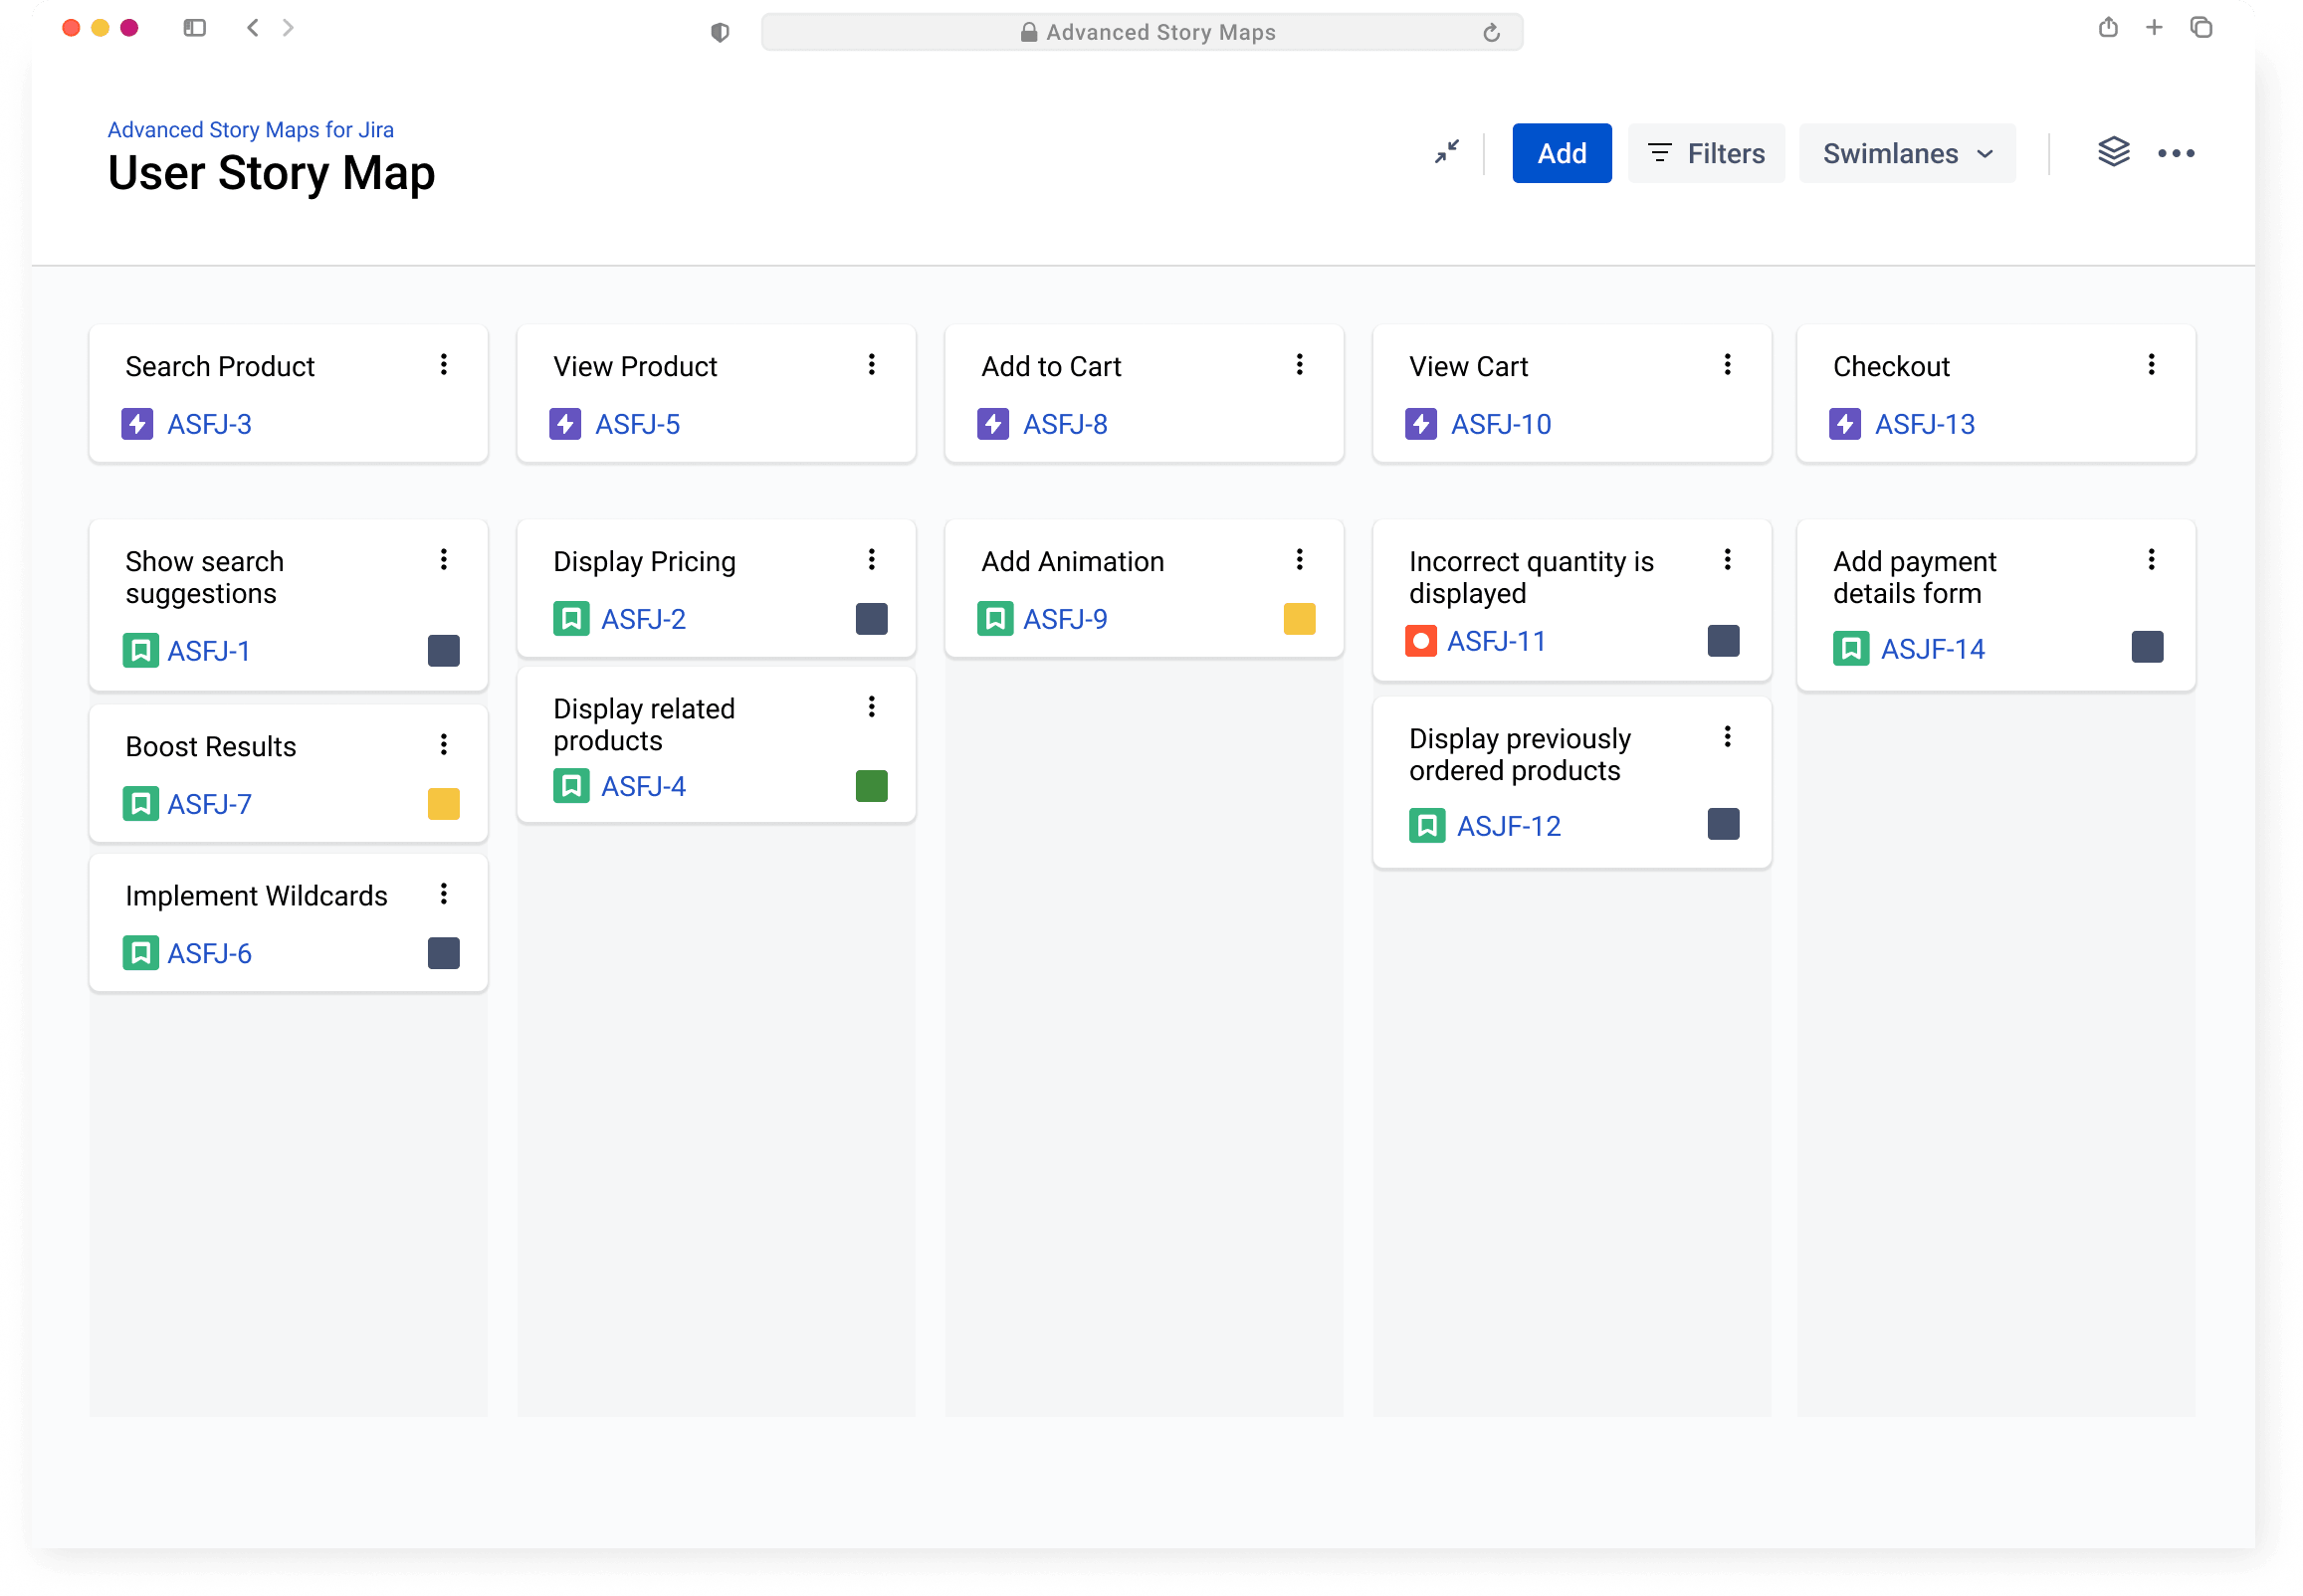 Advanced Story Maps for Jira - The User Story Mapping App